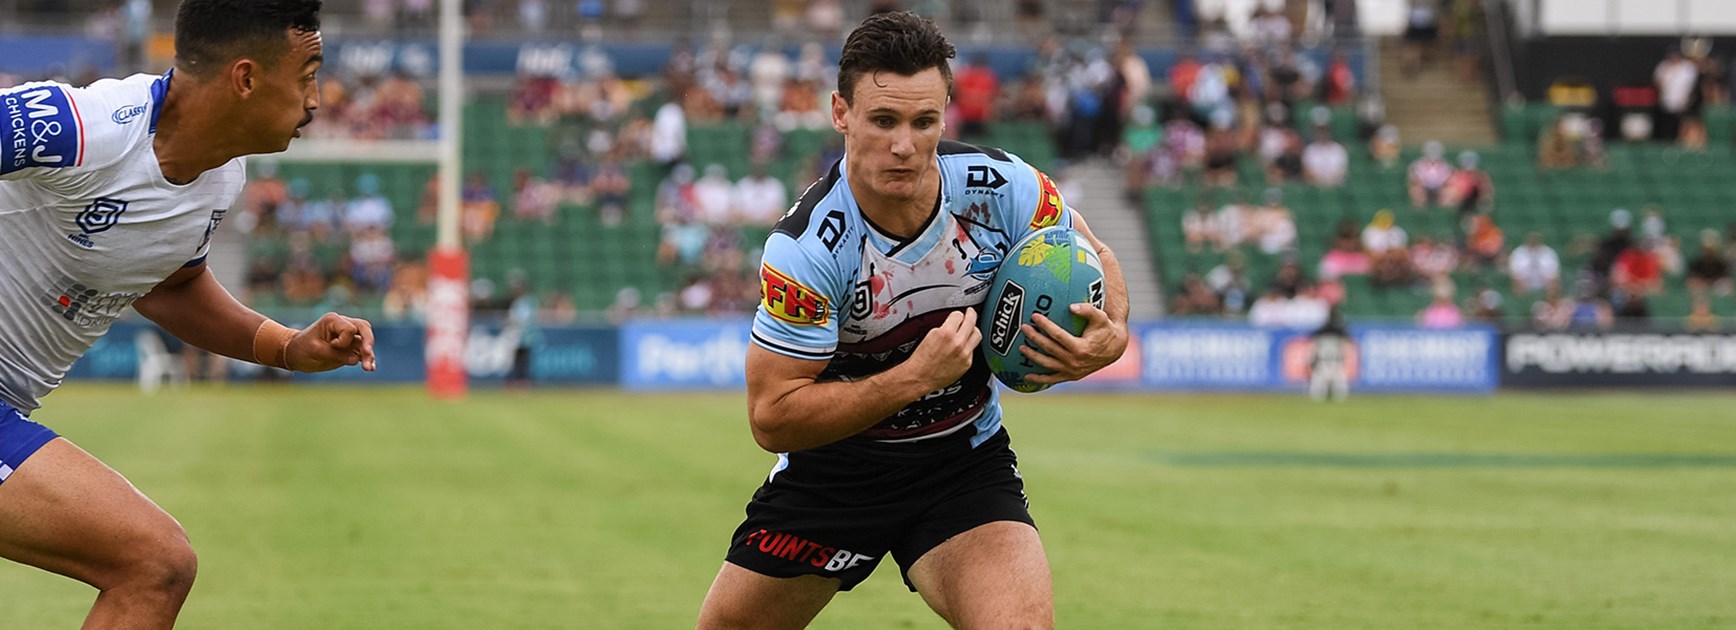 Sharks smash Dogs, but bow out of 9s